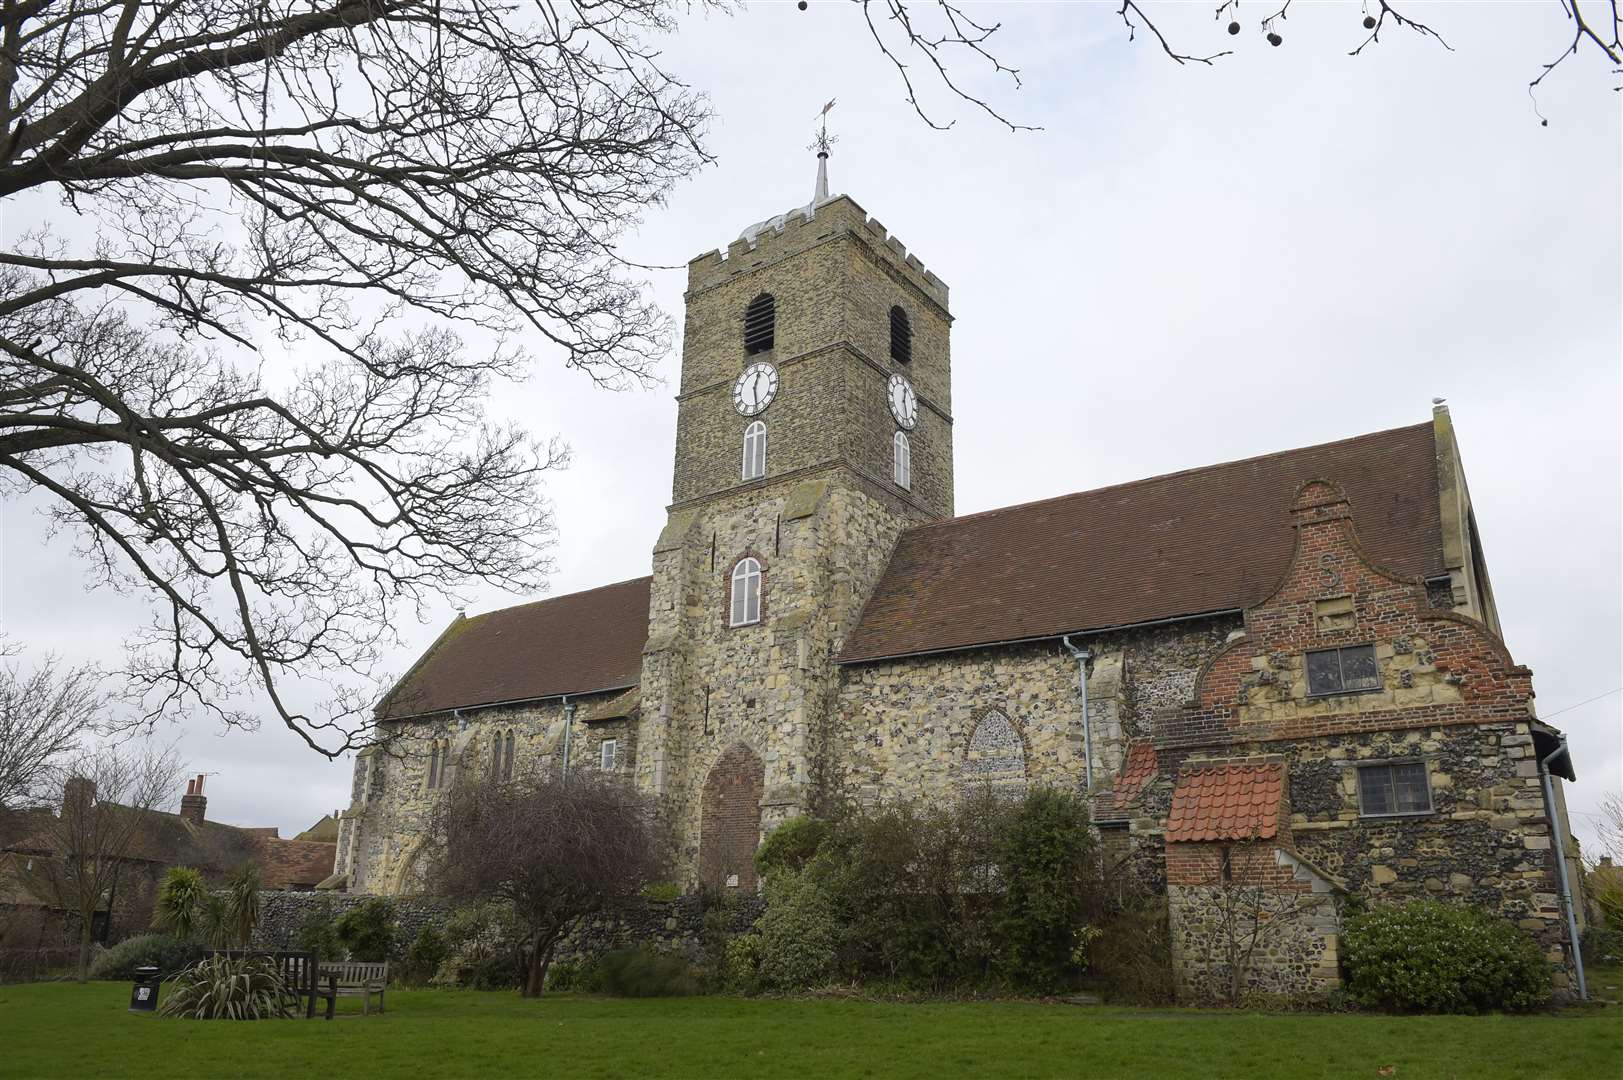 An investigation has been launched into the theft at St Peter's Church in Sandwich